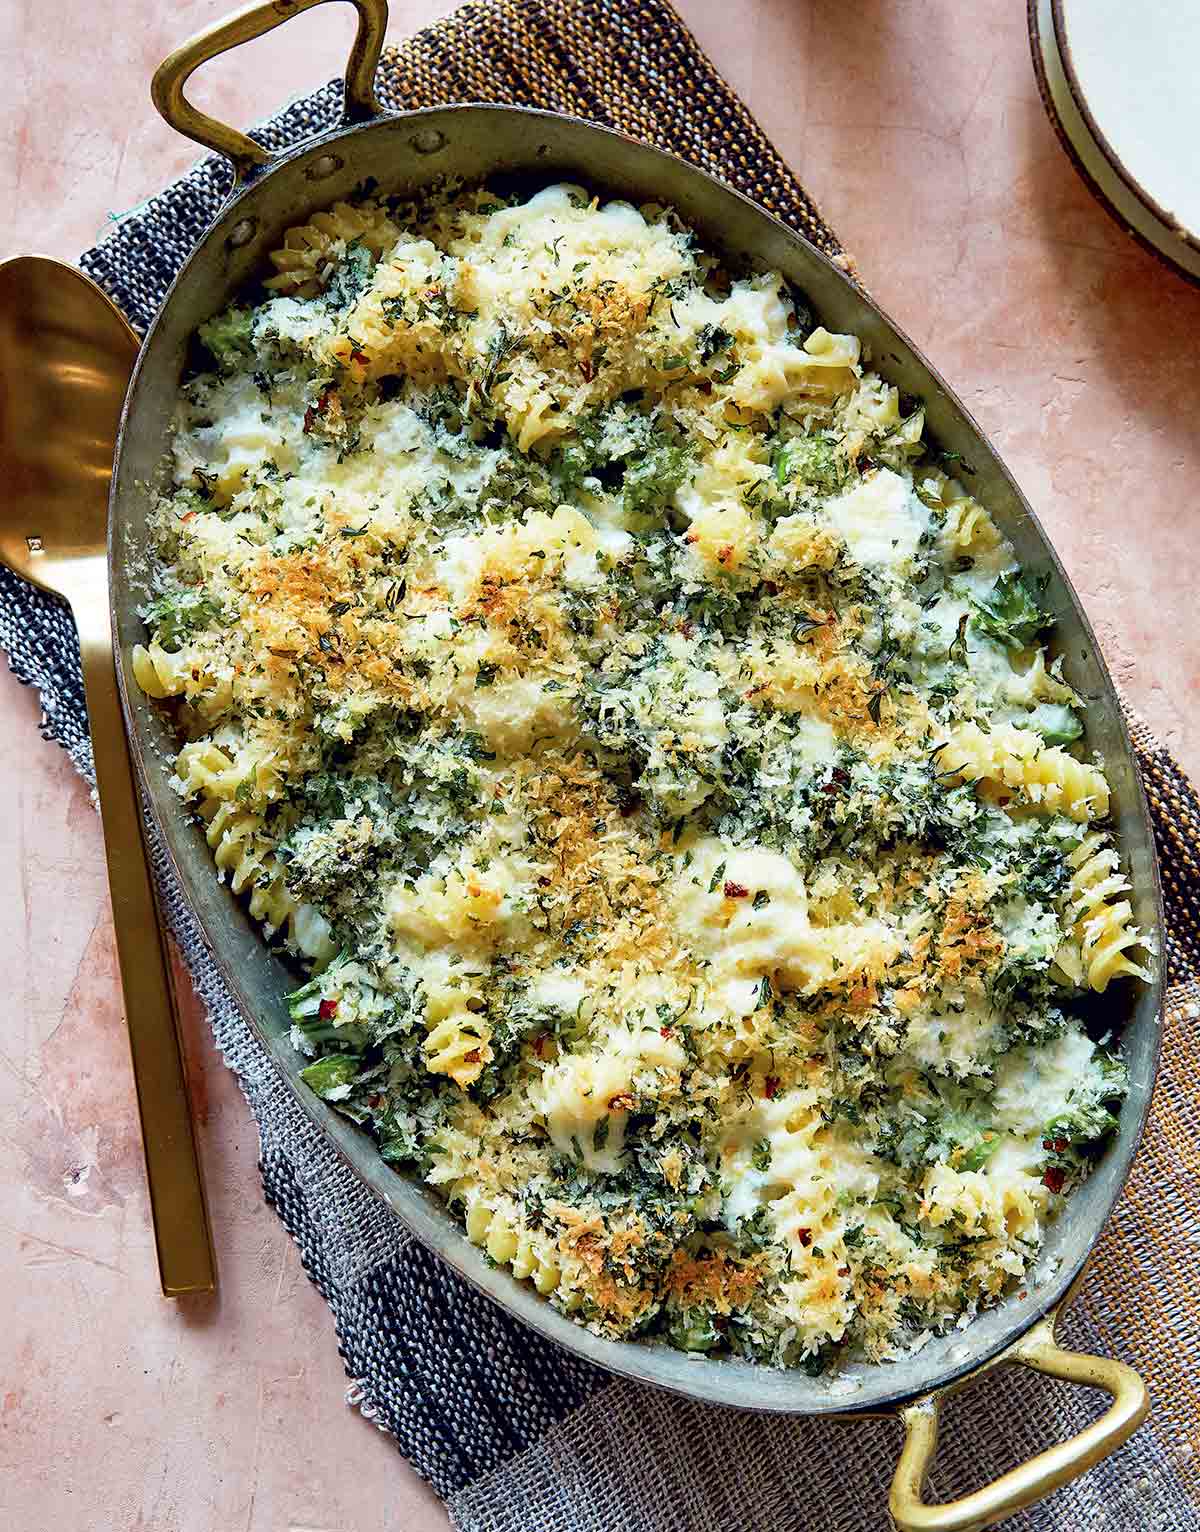 Cheesy baked pasta with broccoli in a large metal casserole dish, with a serving spoon and napkin.